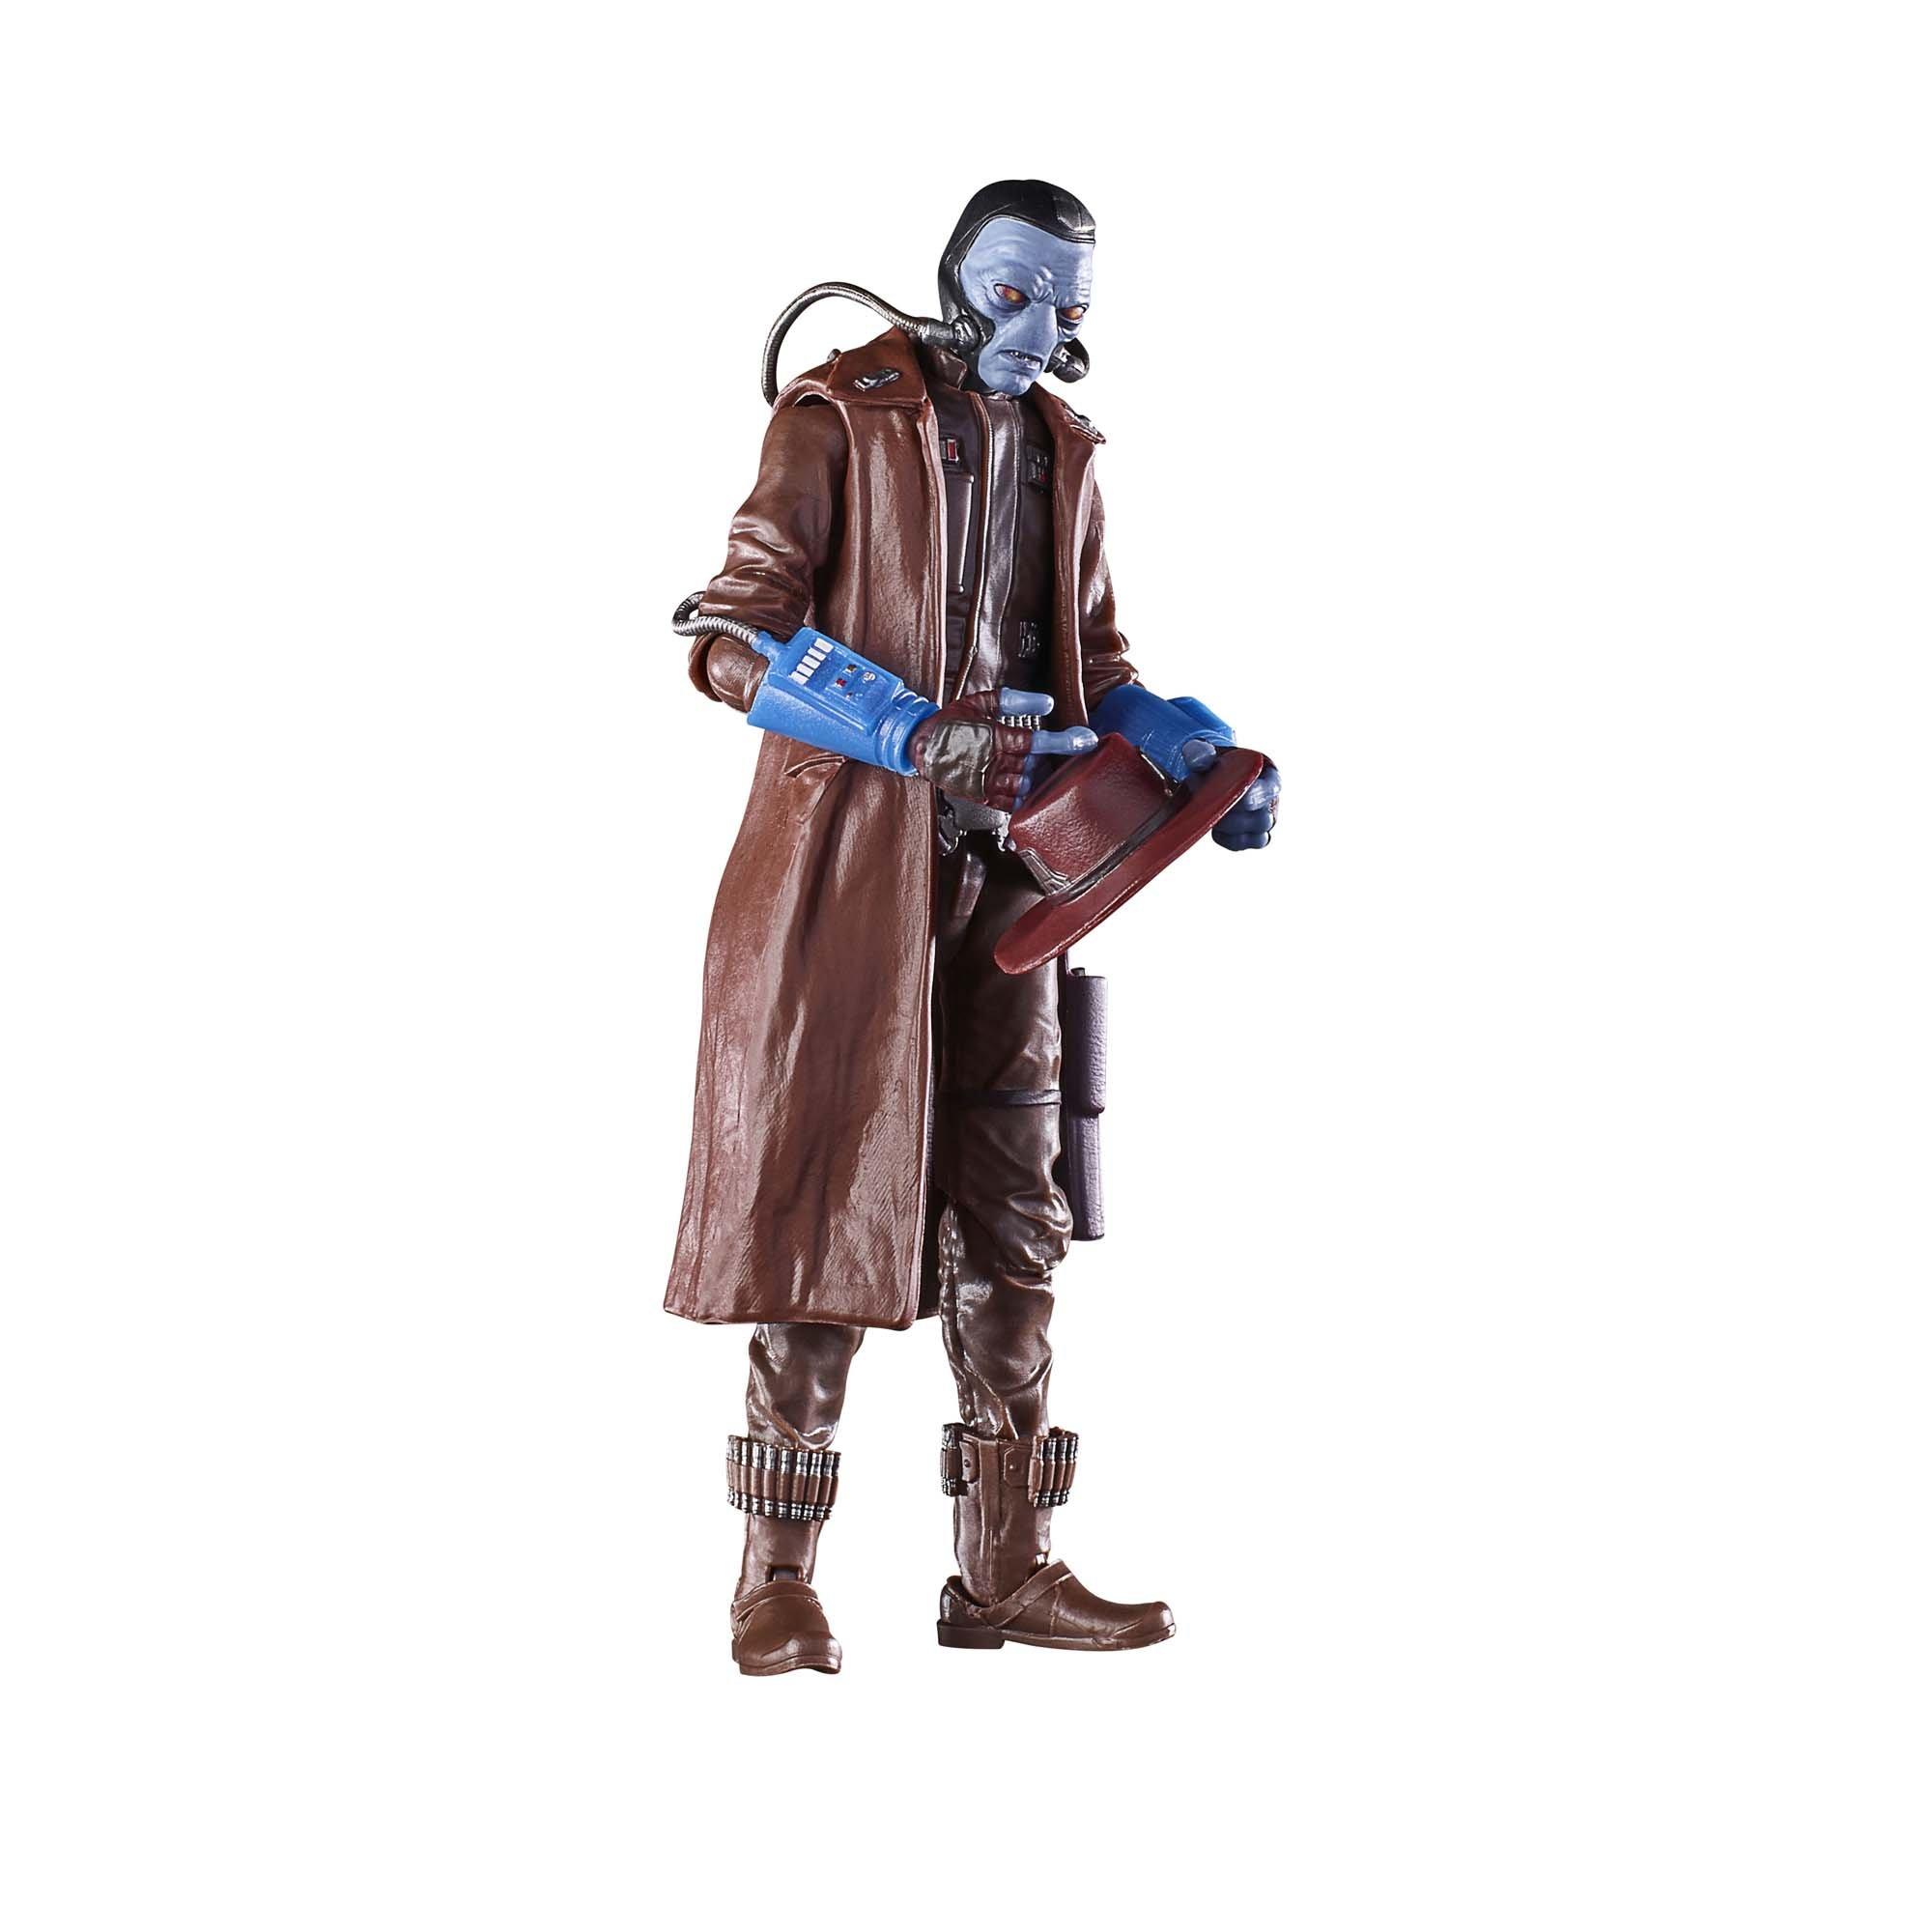 Hasbro Star Wars: The Black Series Star Wars: The Book of Boba Fett Cad Bane 6-in Action Figure